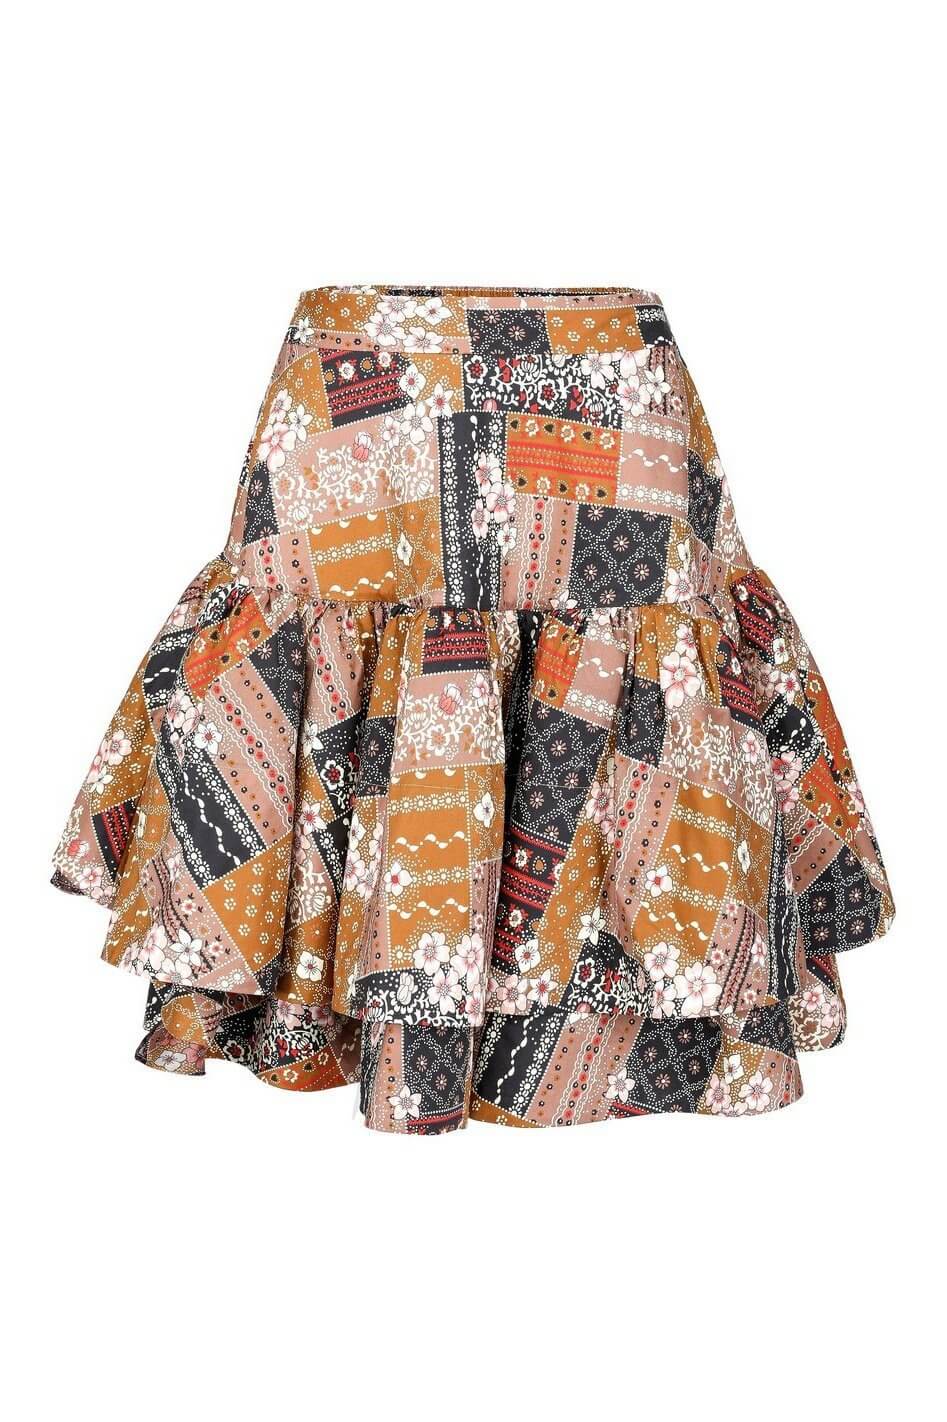 The Patchouli Beverly Hills Skirt